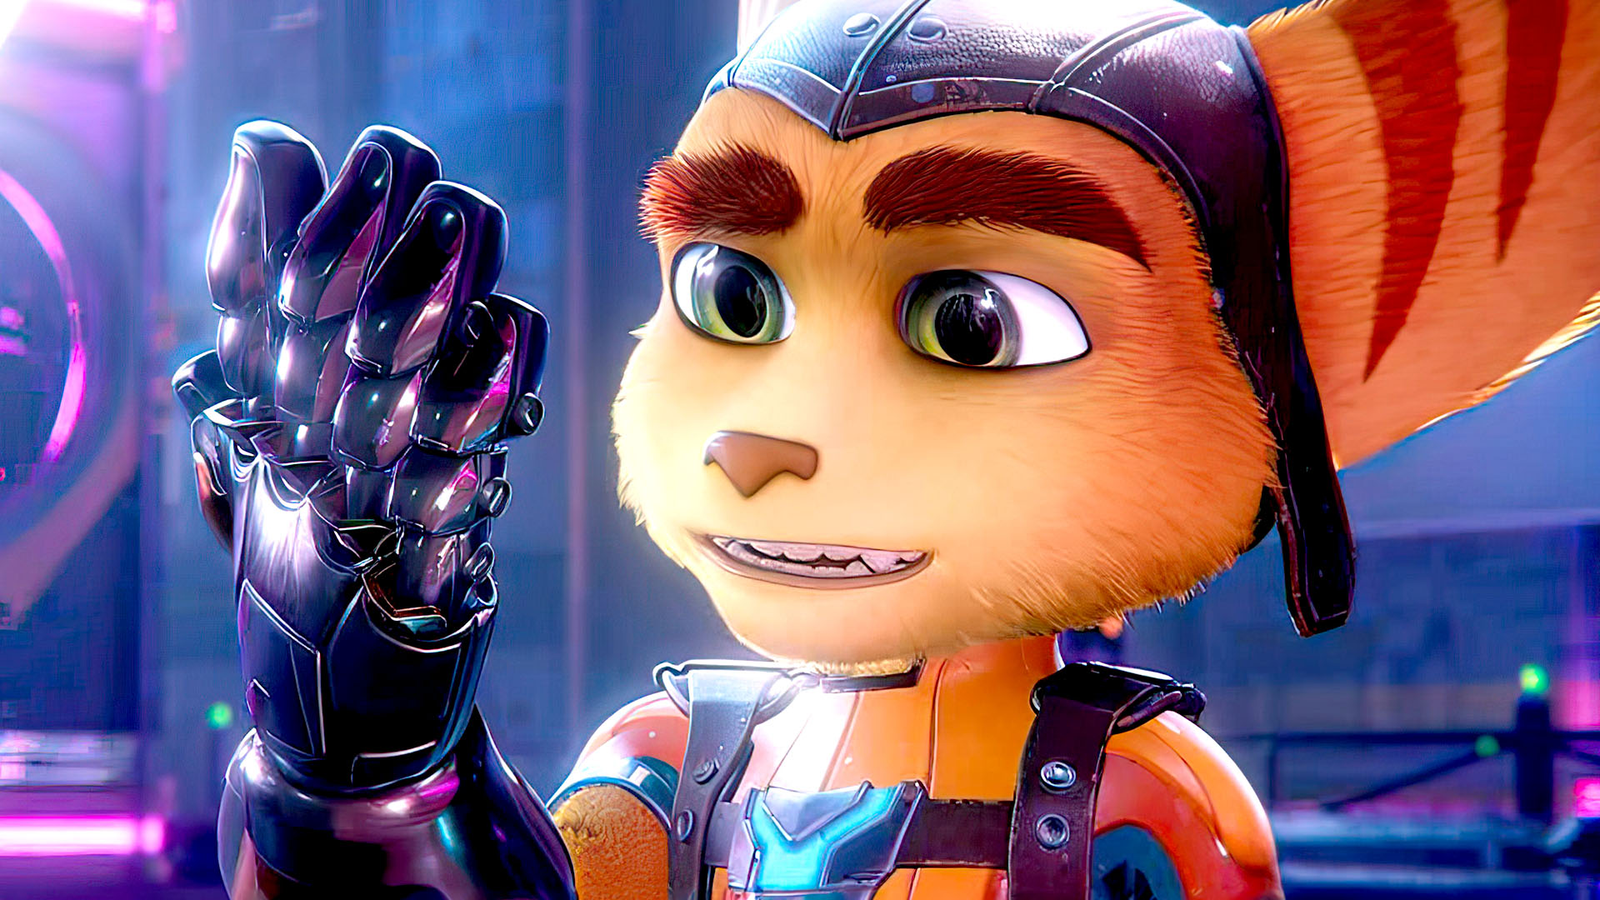 Ratchet and Clank: Rift Apart for PC